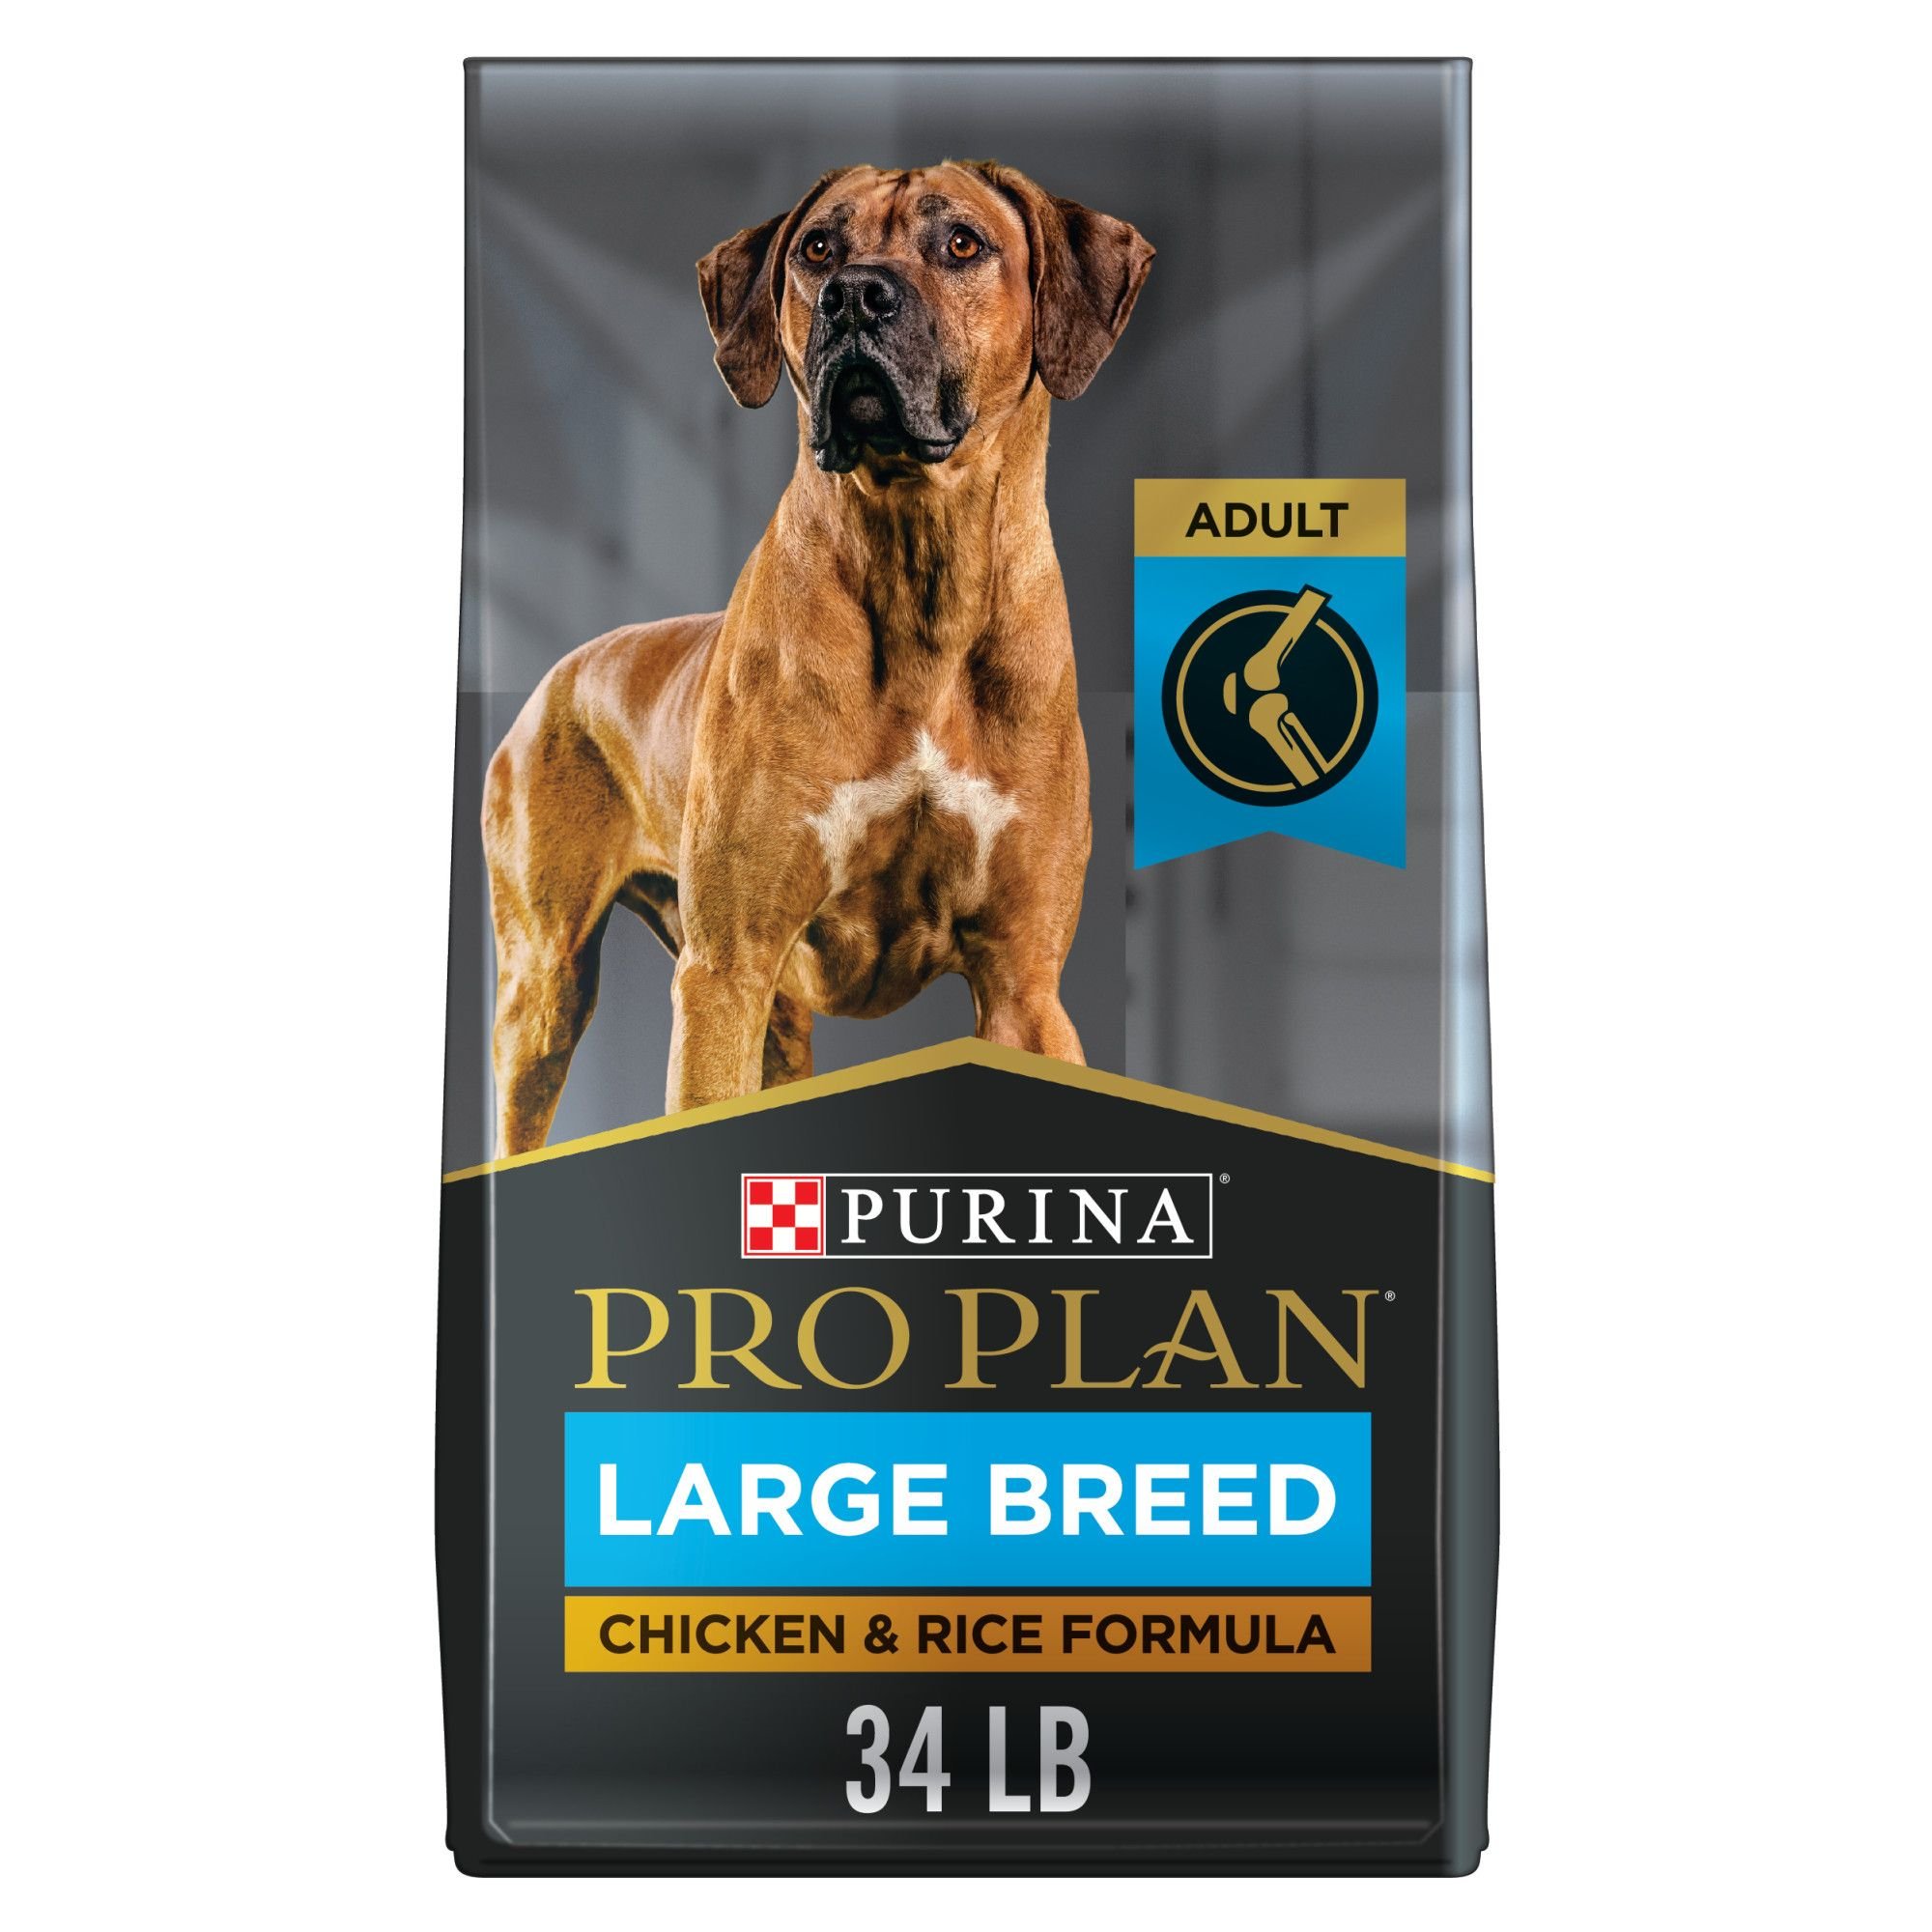 PURINA PRO PLAN Adult Large Breed Chicken & Rice Formula Dry Dog Food ...